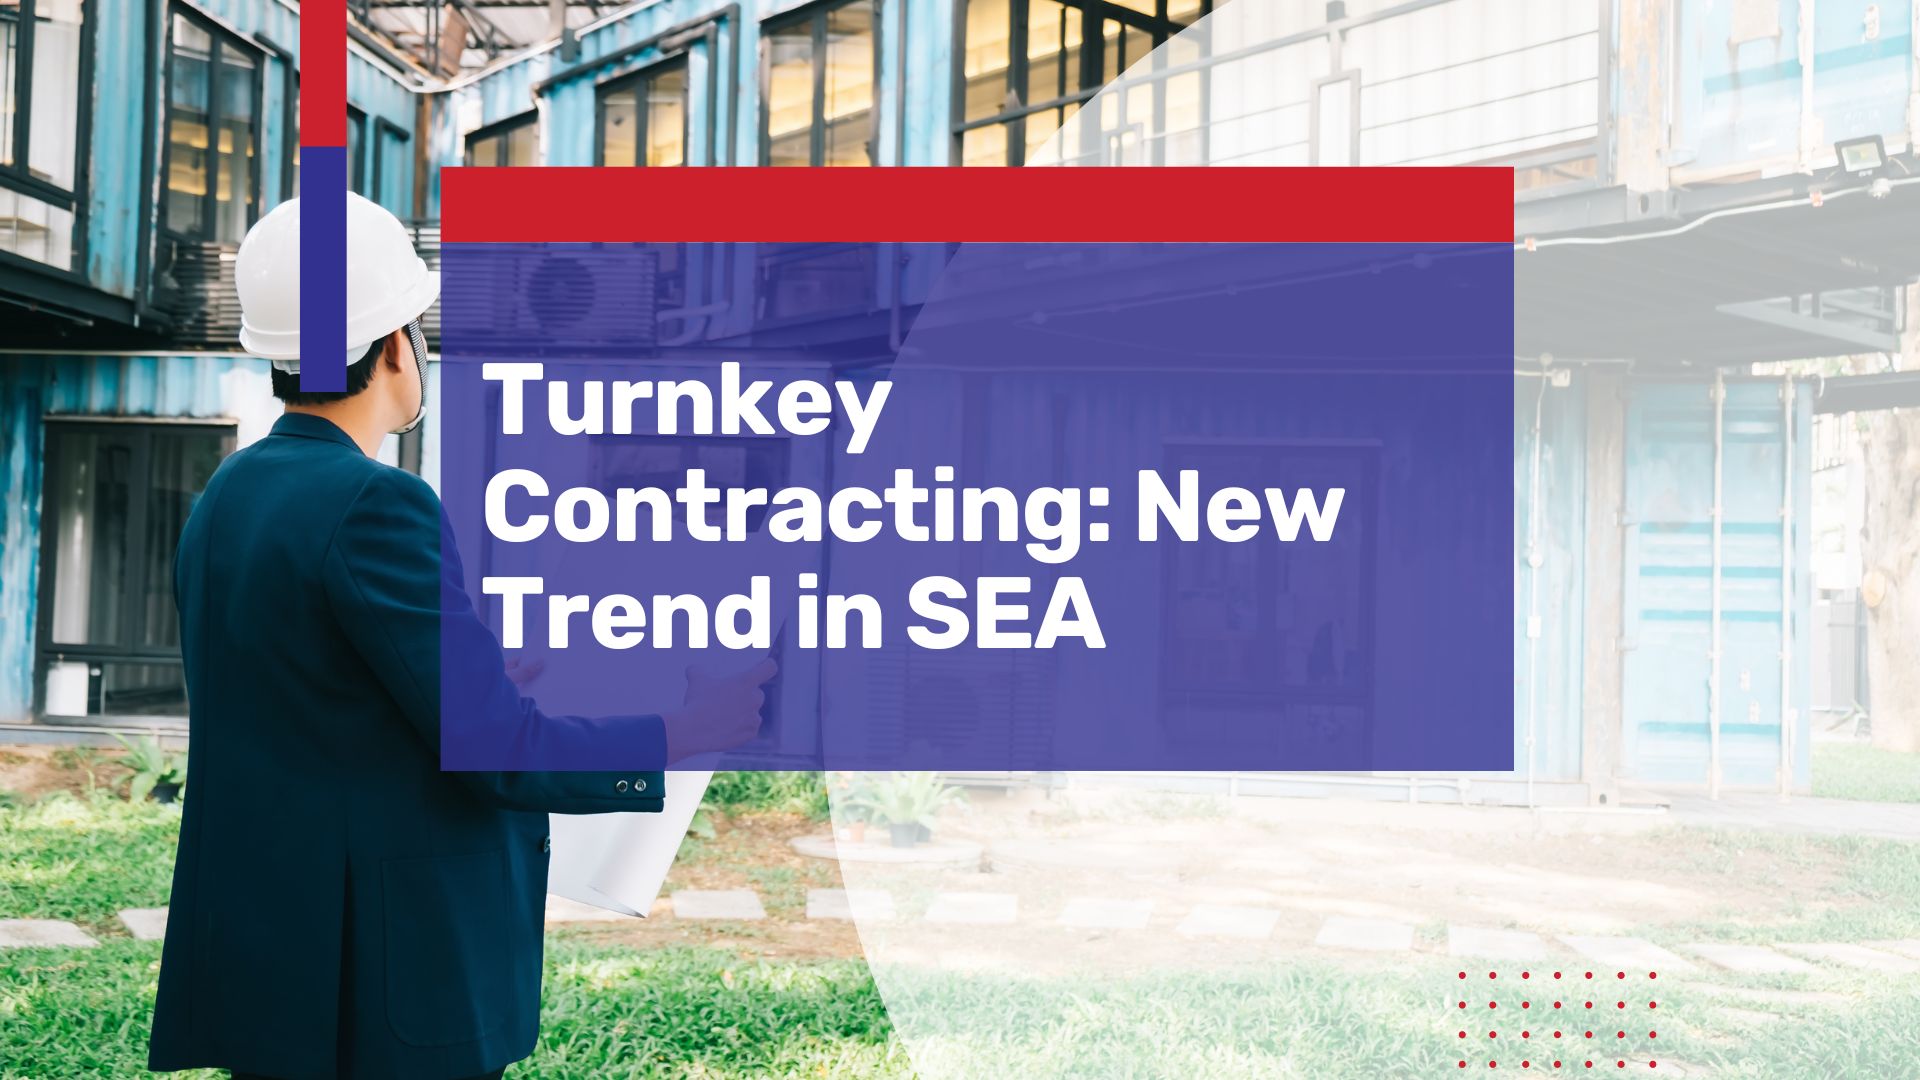 turnkey manufacturing newest contracting trend southeast asia